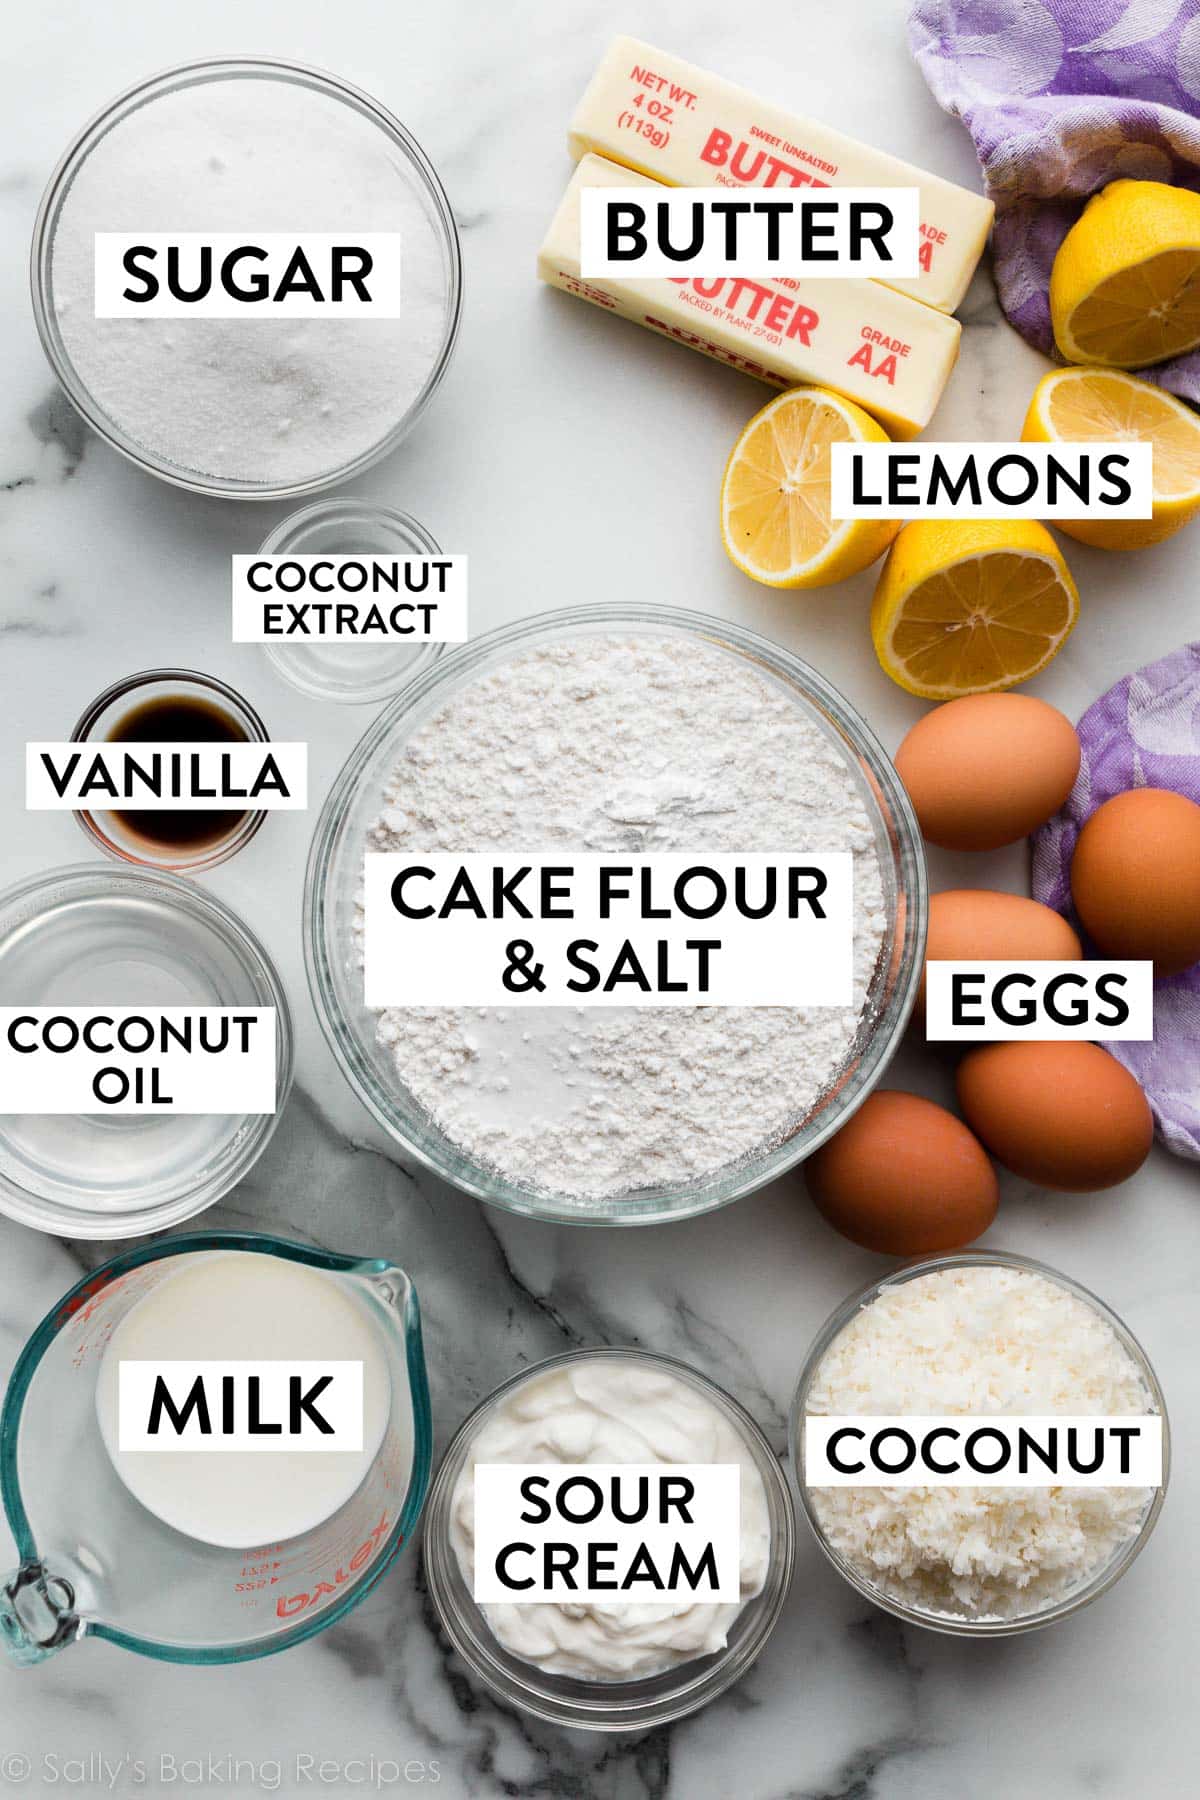 ingredients on counter including eggs, butter, cut lemons, cake flour, coconut, sour cream, and more.